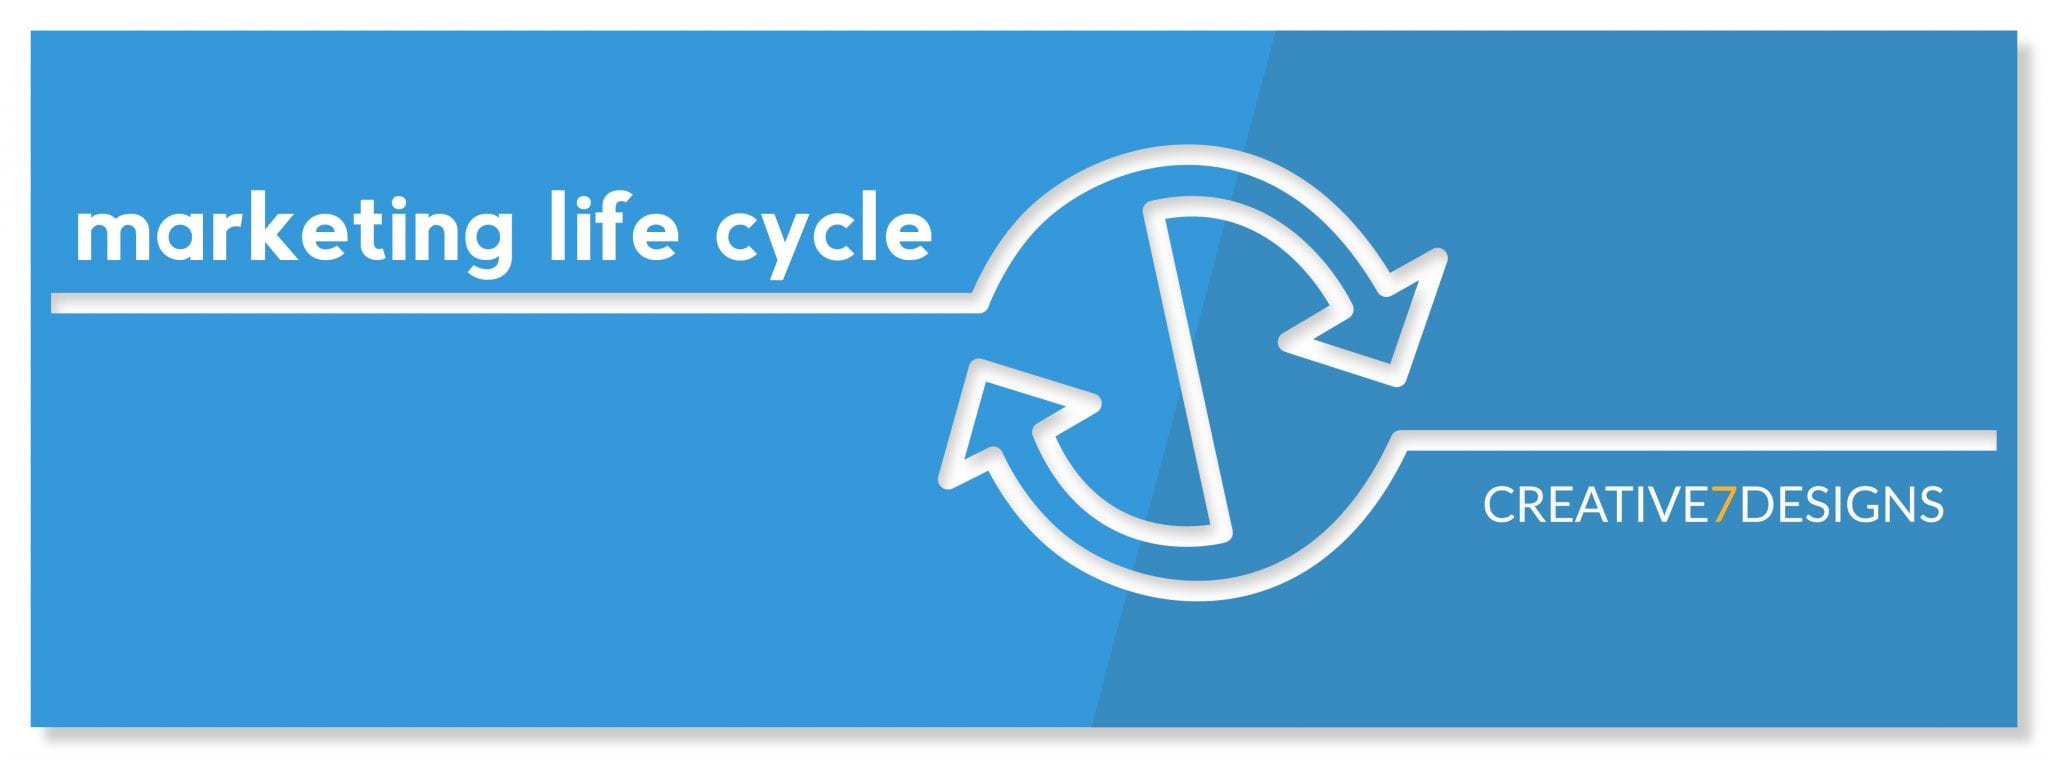 blue image with white circle images and marketing lifecycle on it